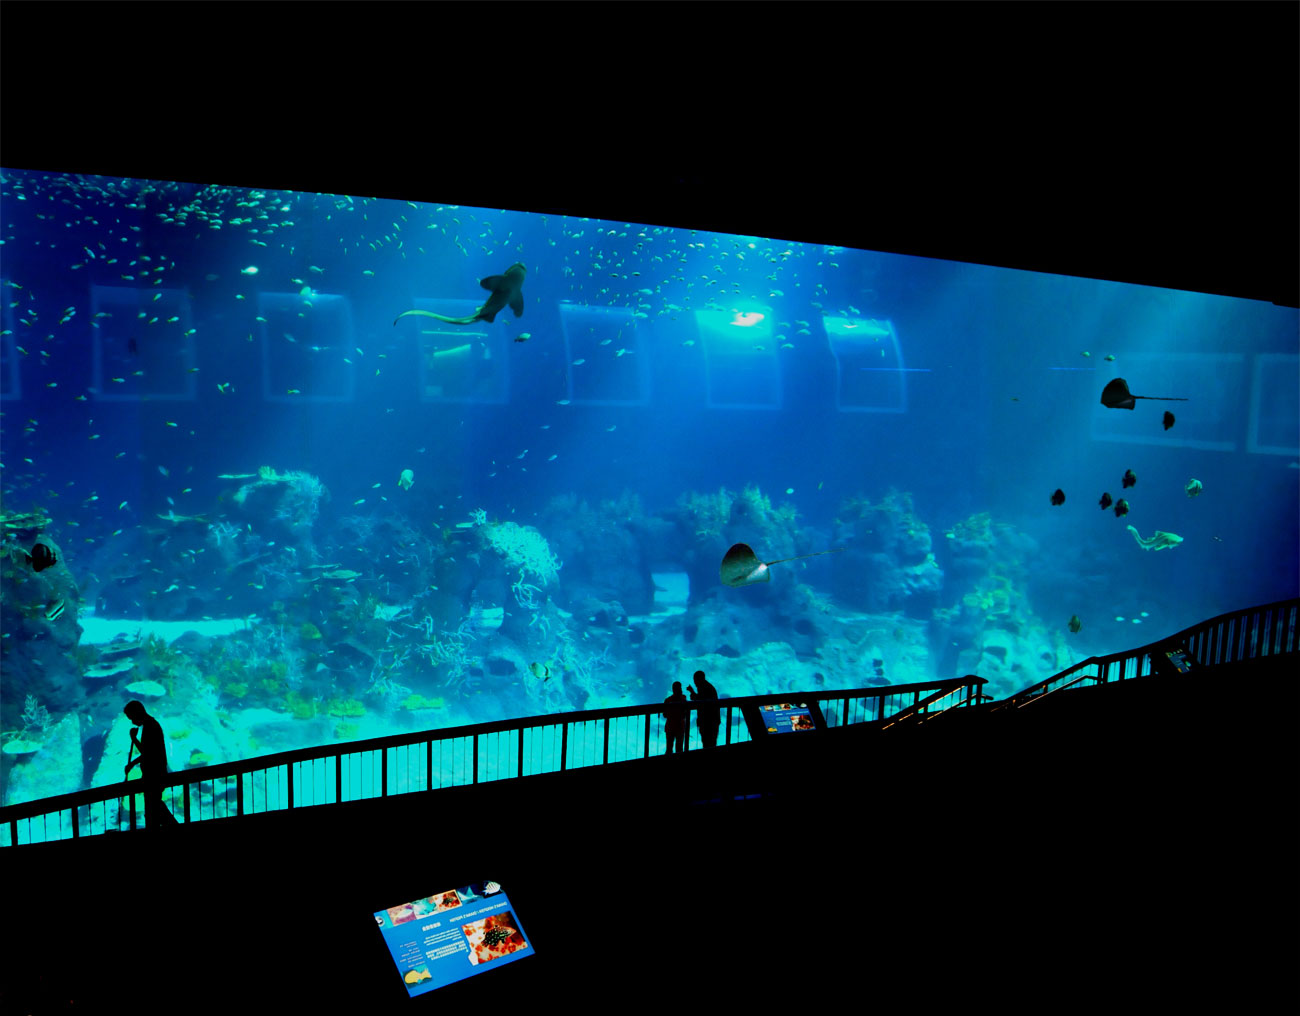 Reynolds Polymer is known for manufacturing the World's Largest Aquarium Window at Resorts World Sentosa.